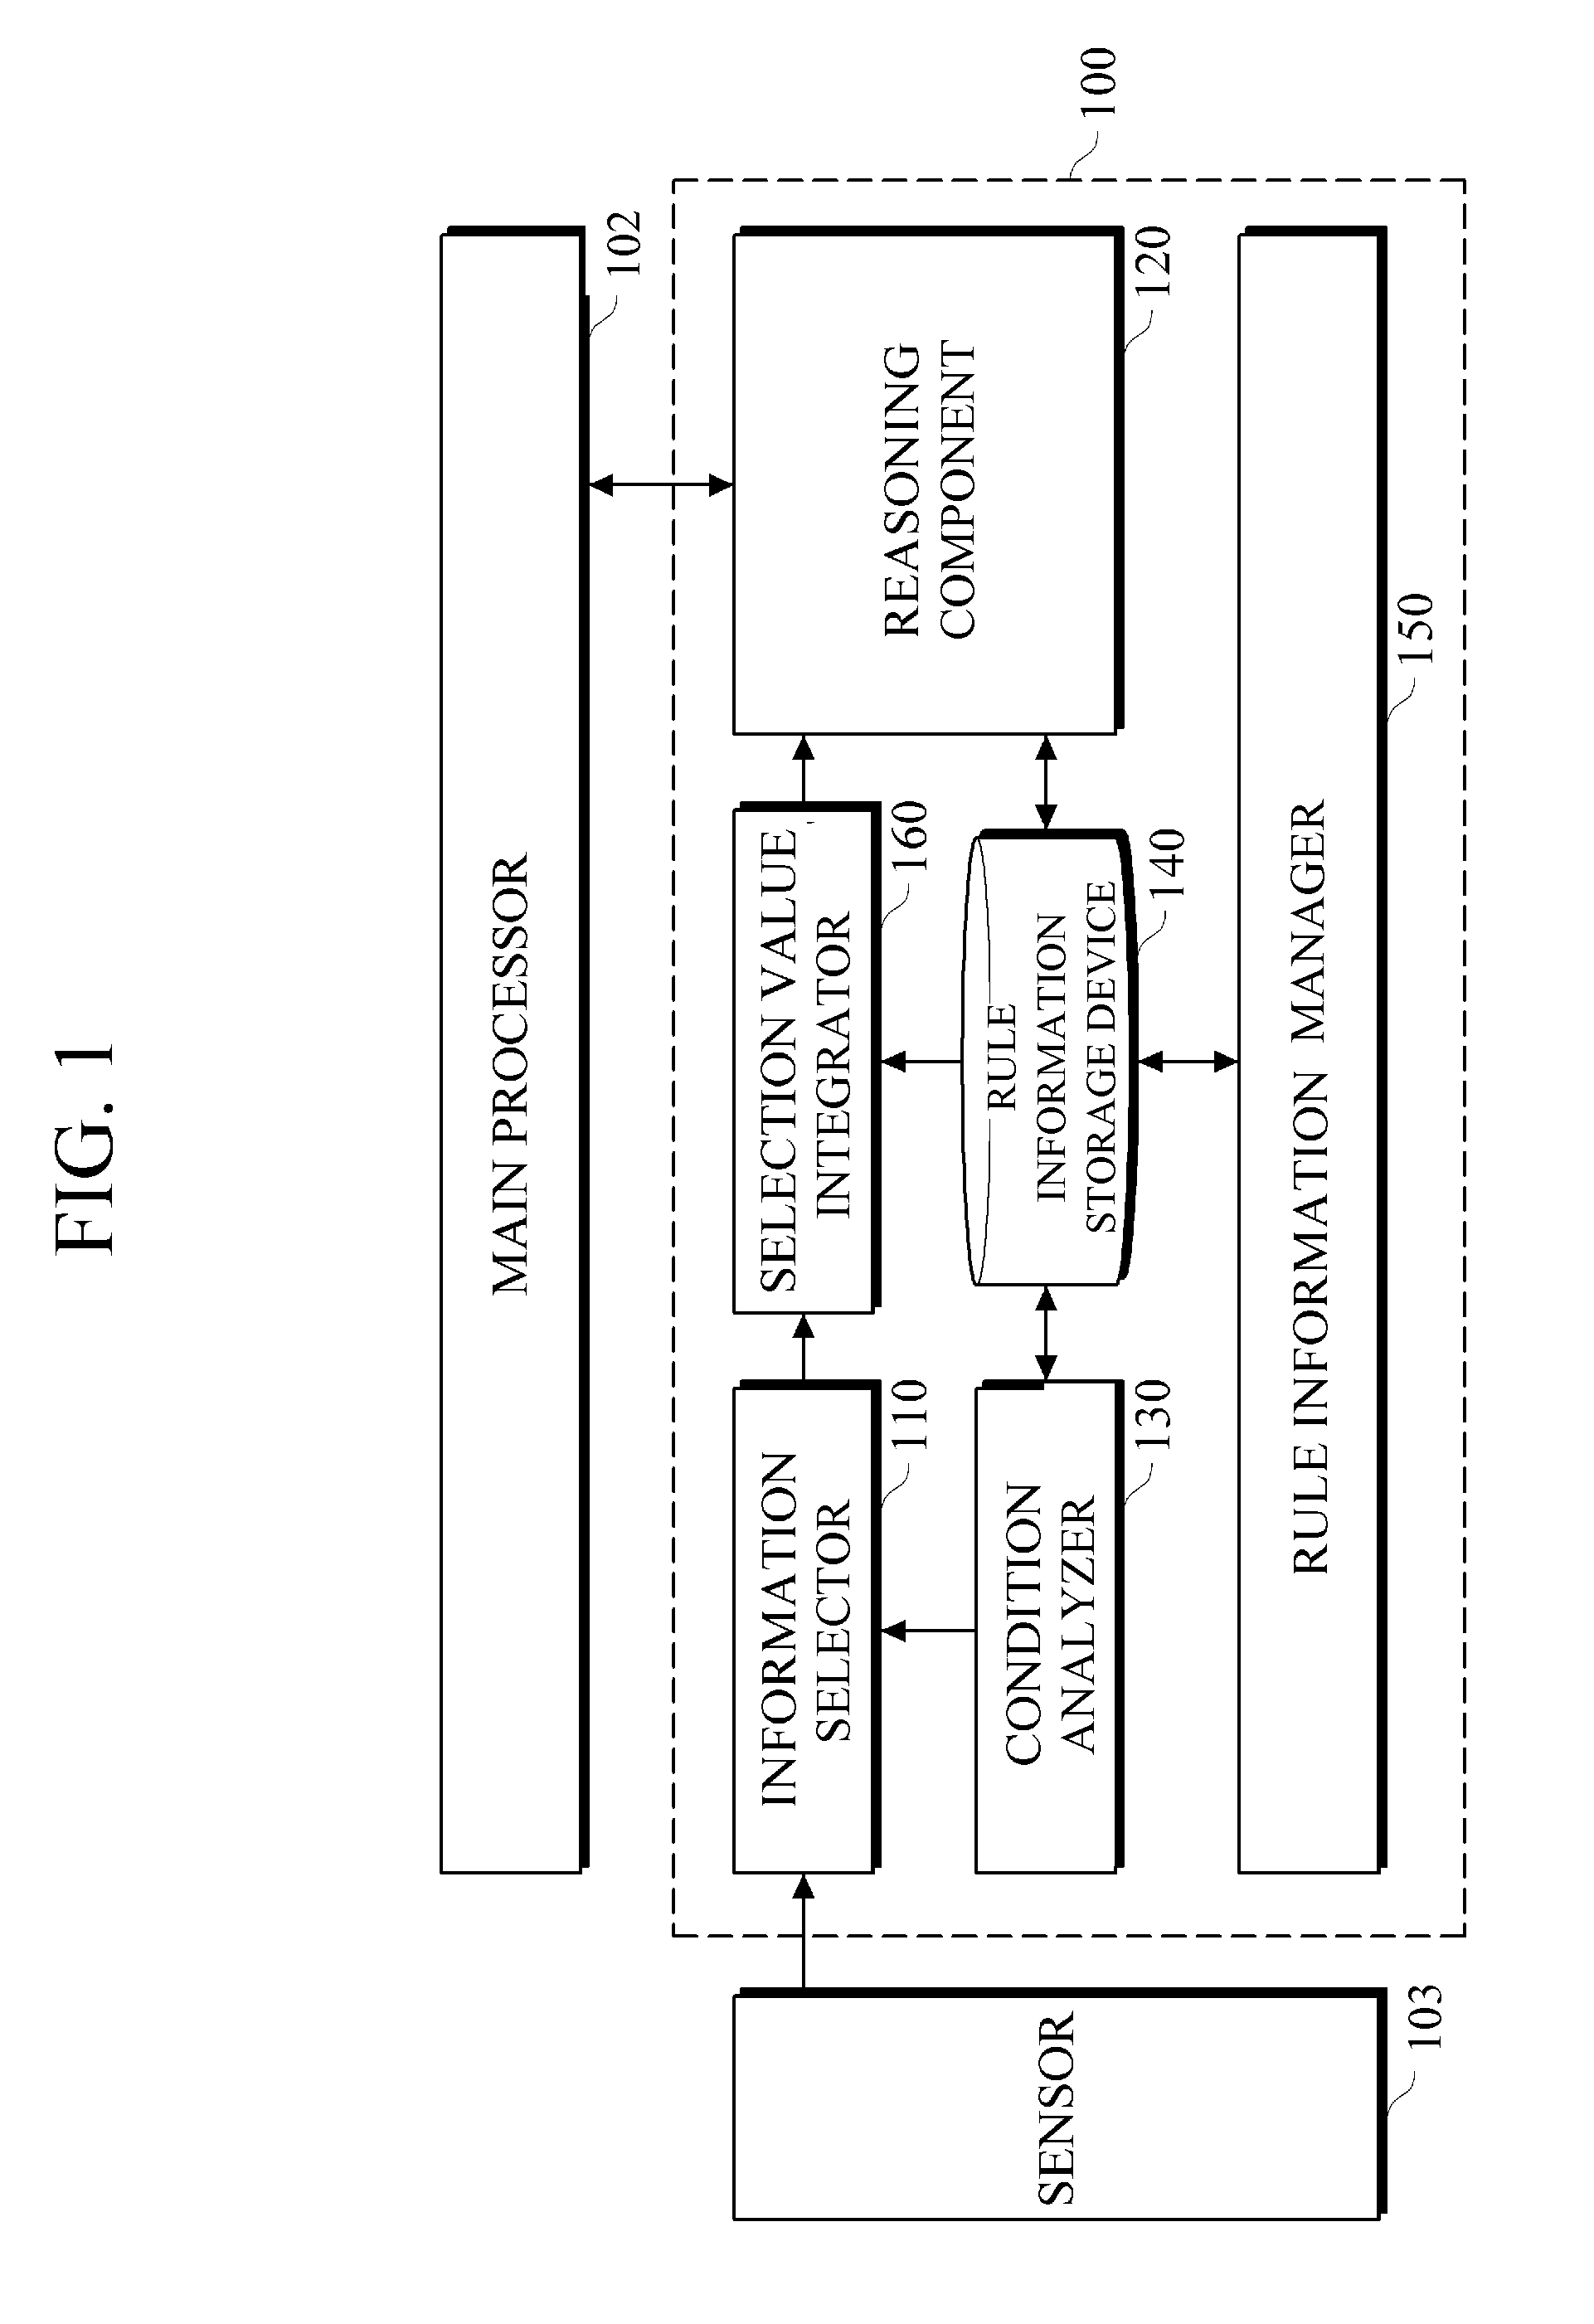 Context-aware apparatus and method for improving reasoning efficiency thereof